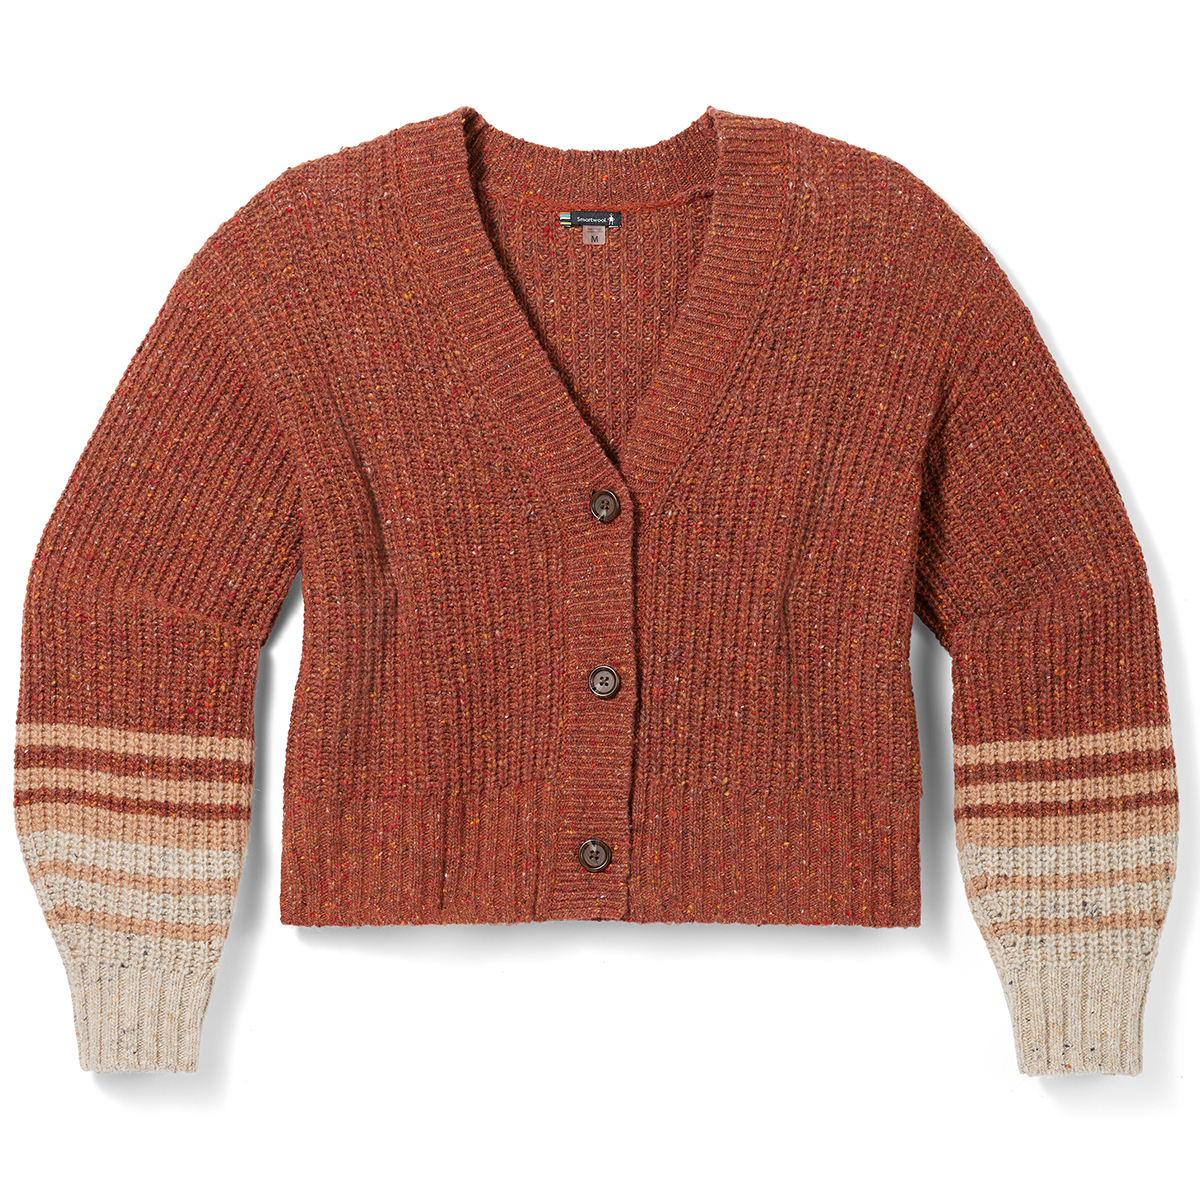 Smartwool Women's Cozy Lodge Cropped Cardigan Sweater - Size M